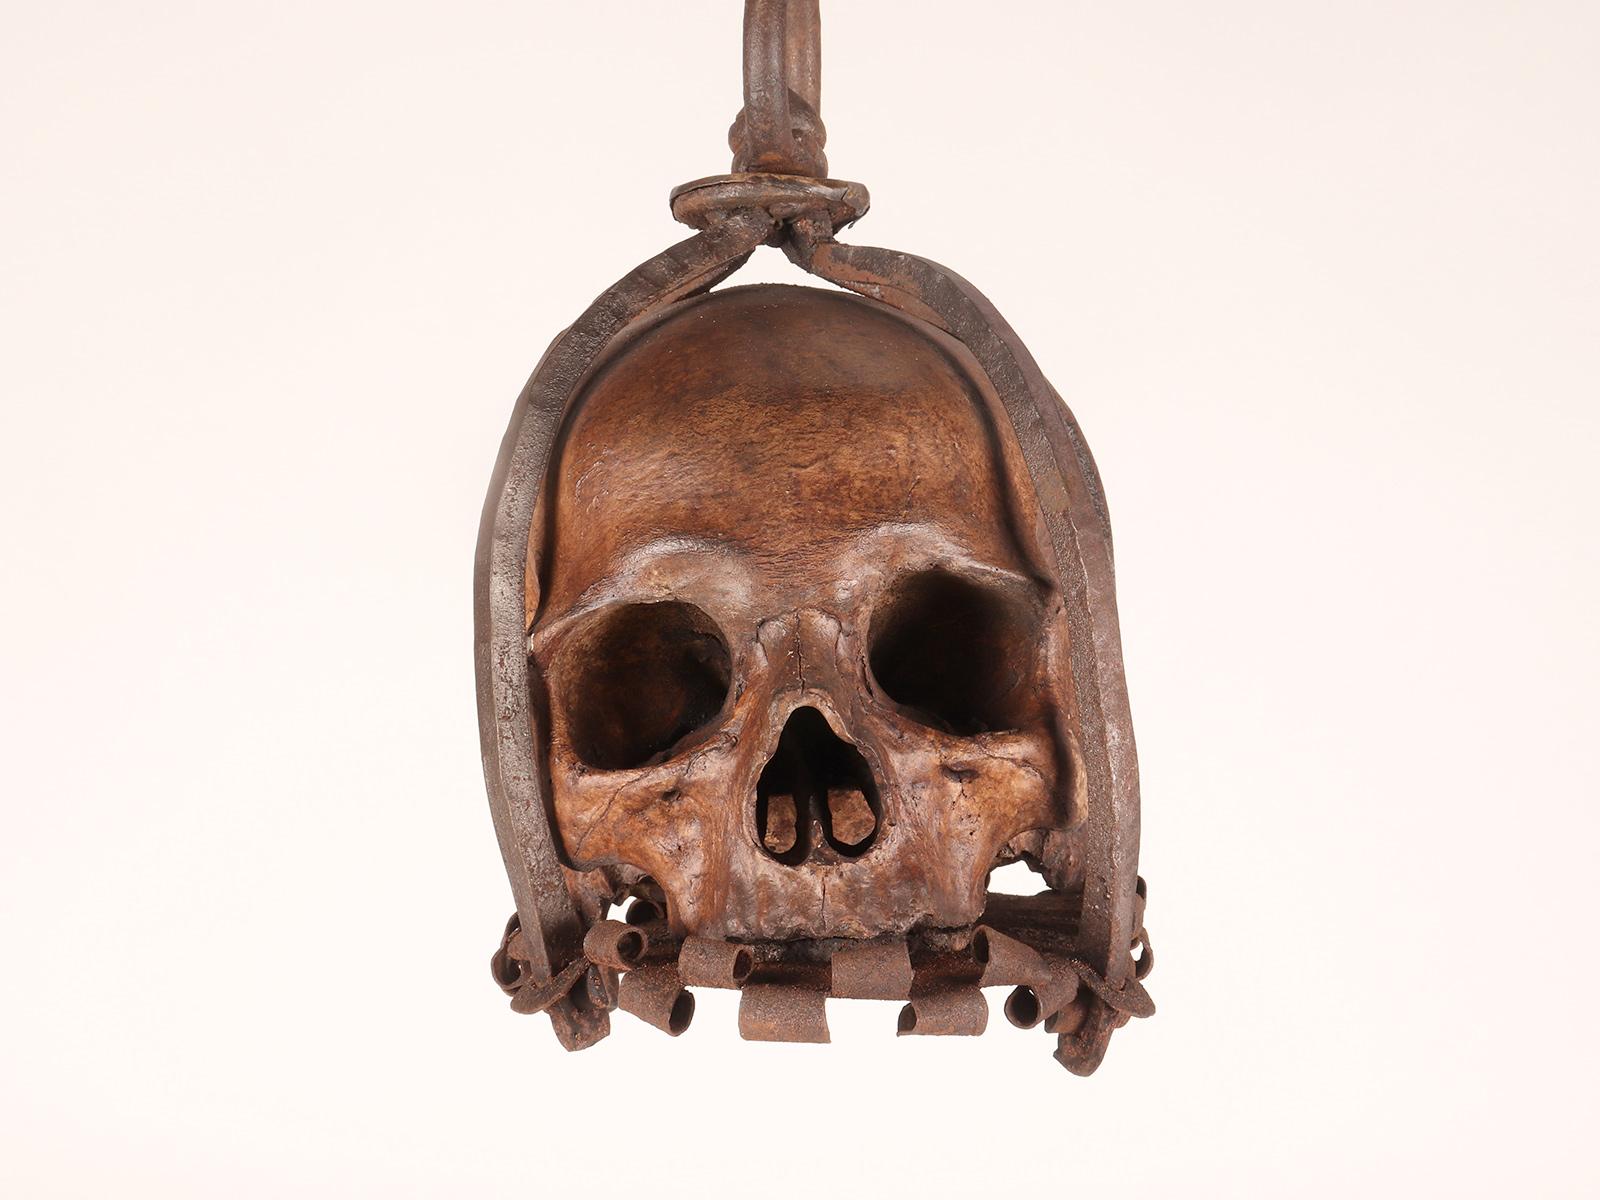 17th Century Memento mori. A caged and suspended skull sculpture, Germany, late 17th century.